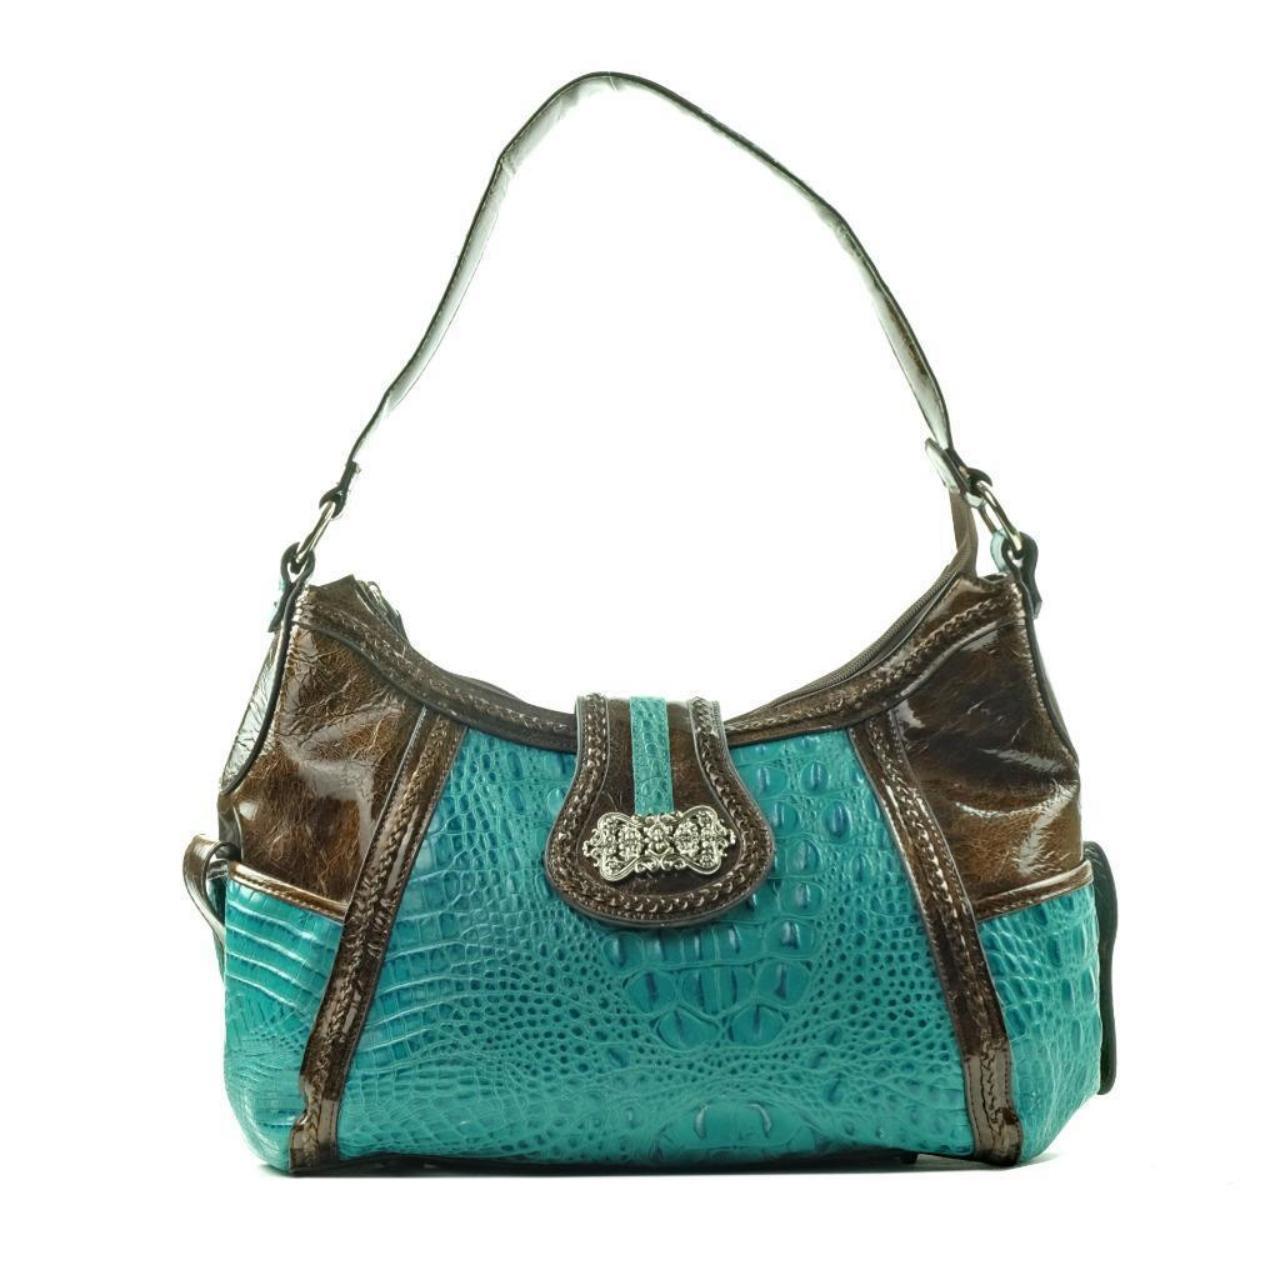 MARC CHANTAL SHOULDER BAG WITH STRAP - $23 - From Millers